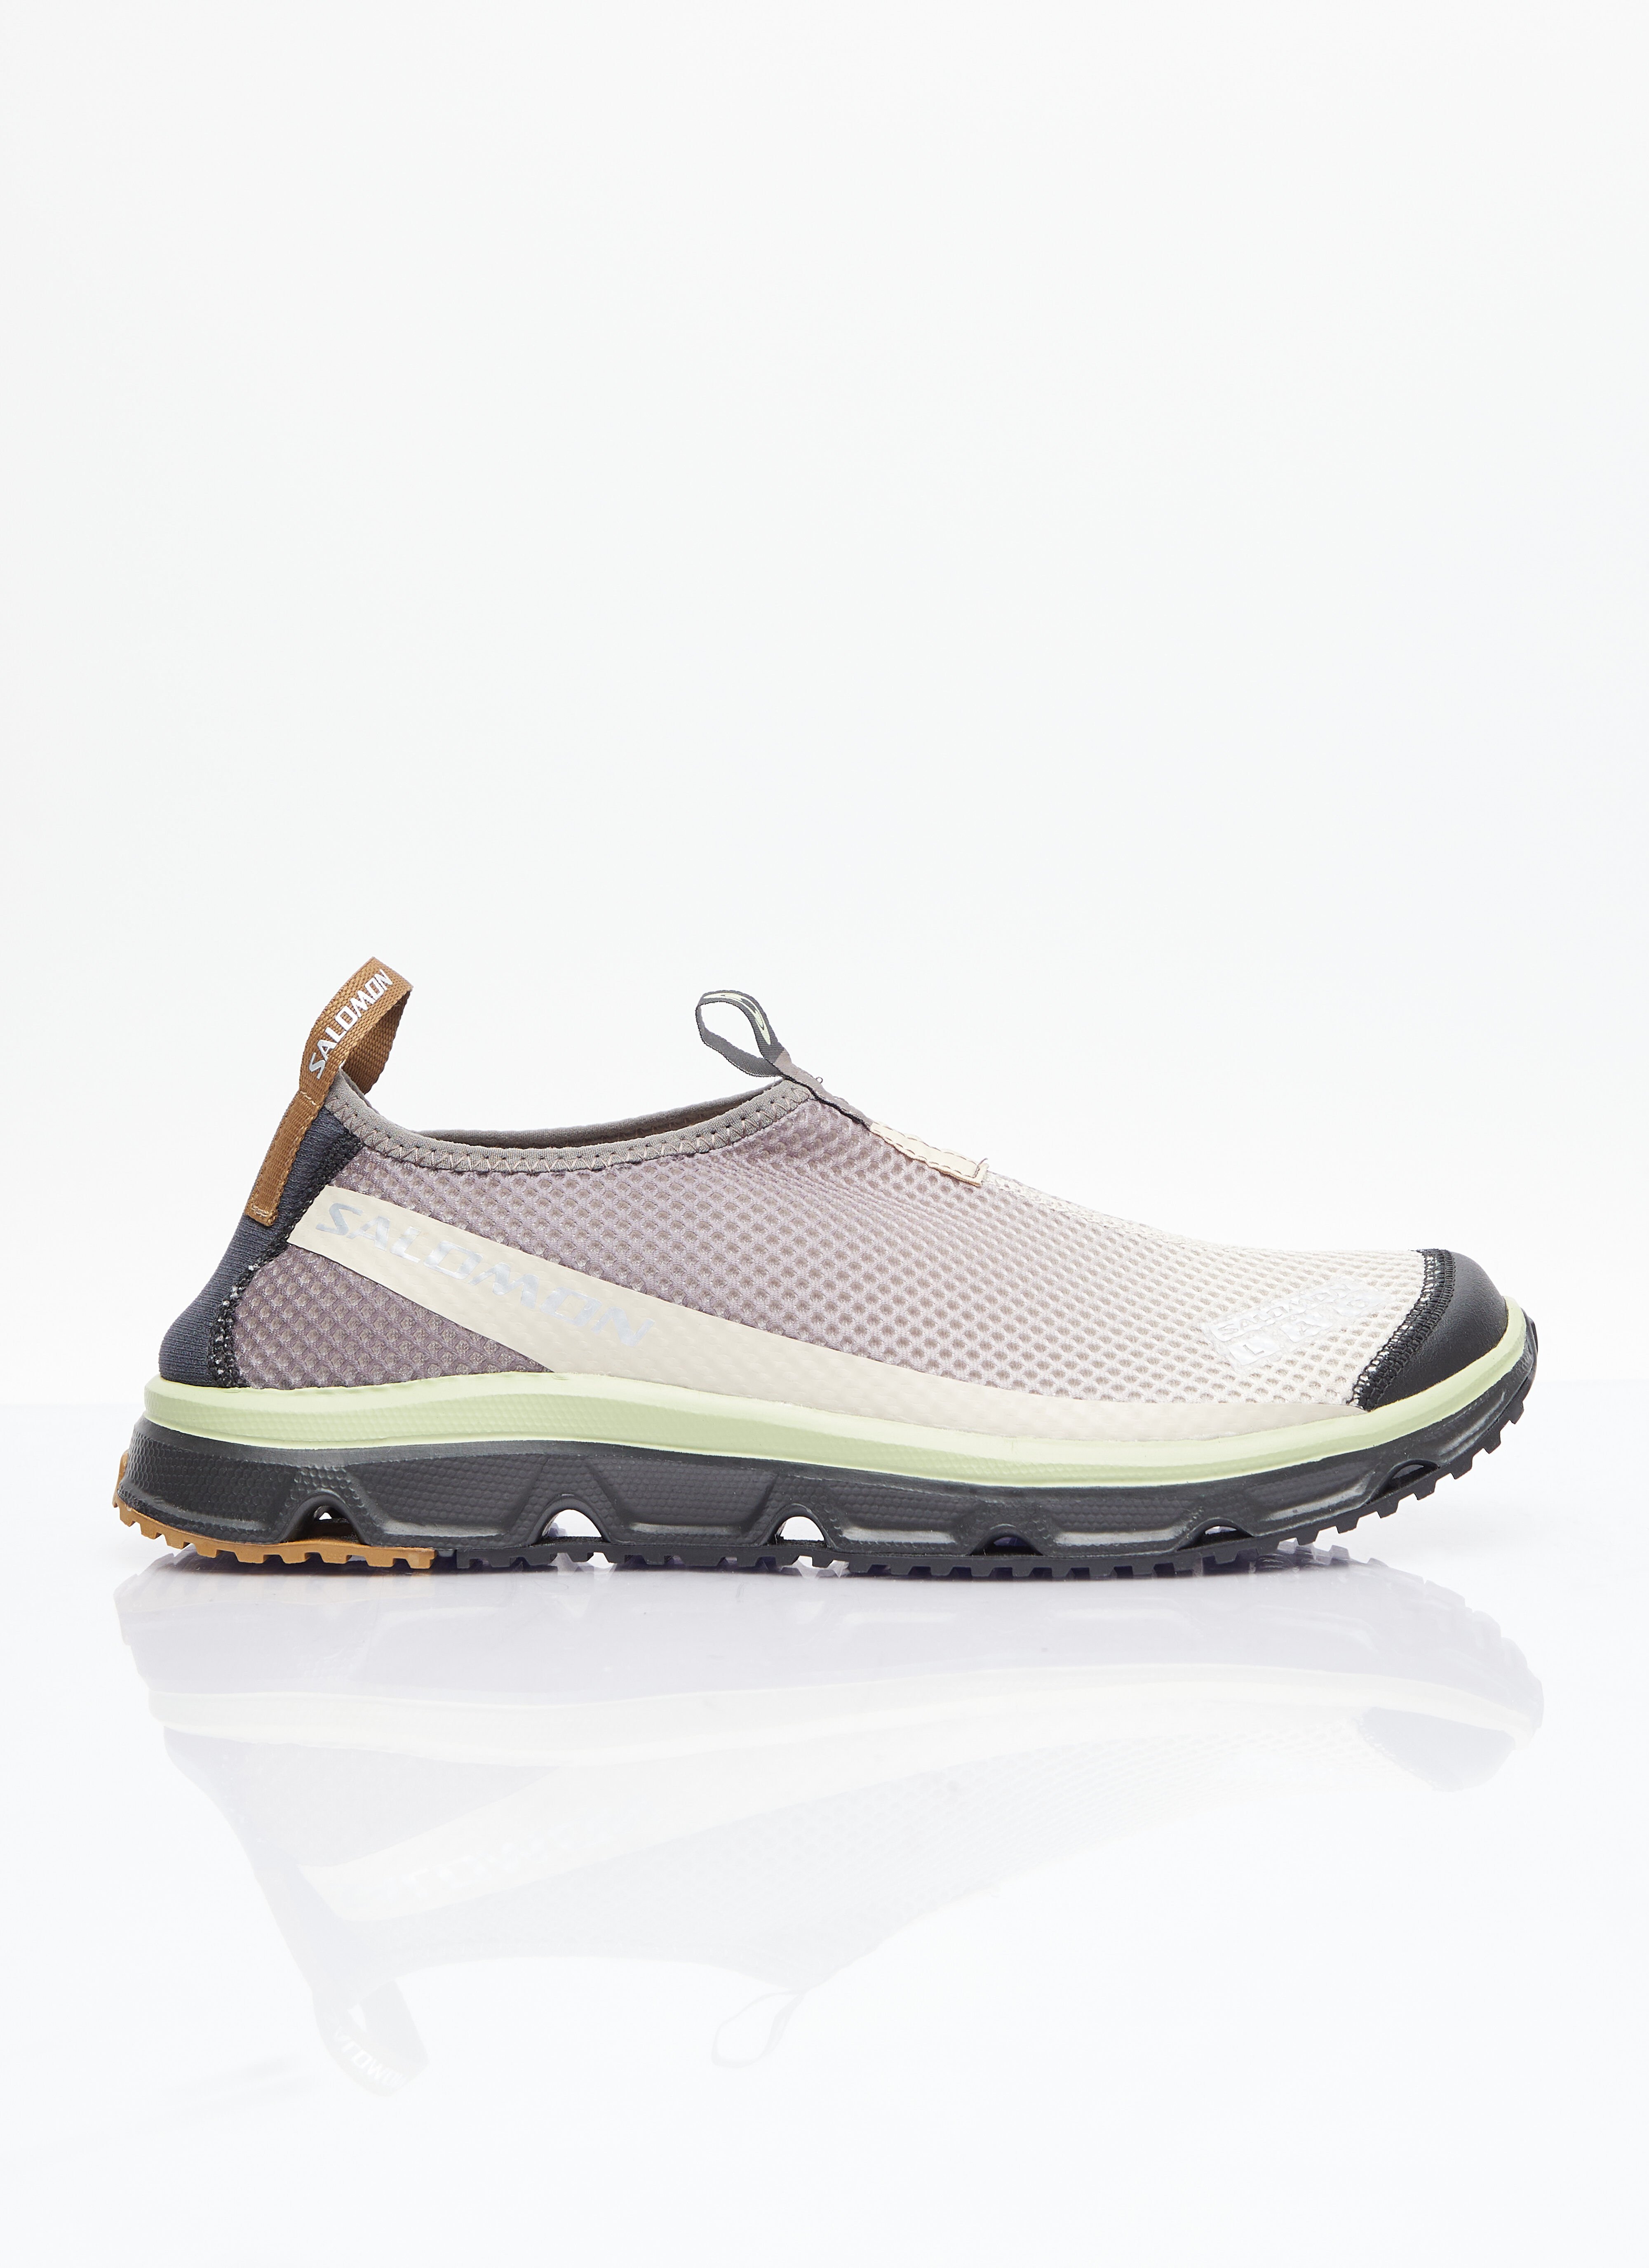 Moon Boot RX Moc 3.0 Slip On Shoes Green mnb0154002